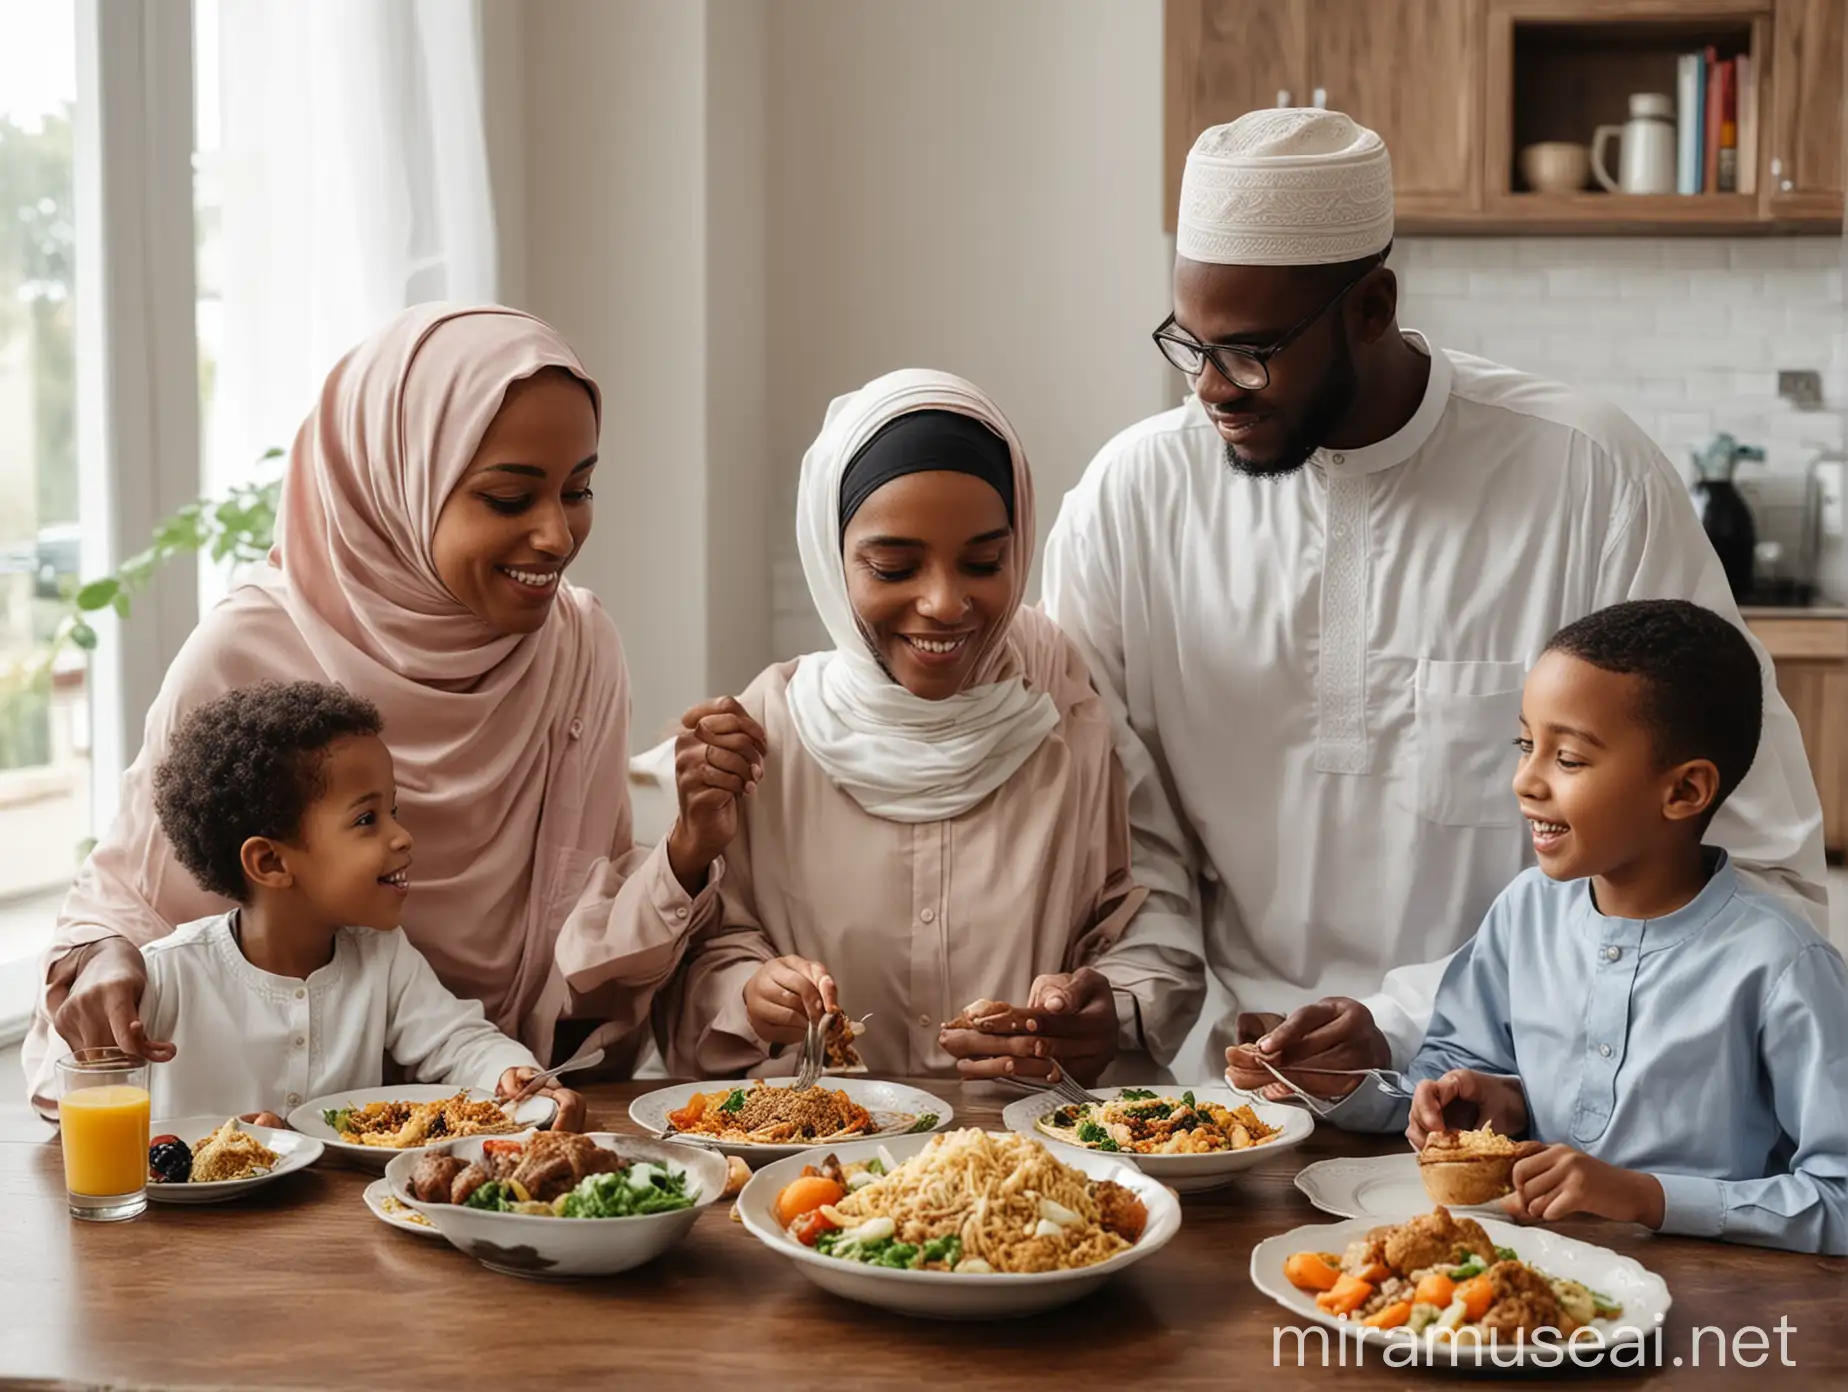 Black Muslim Family Enjoying Homecooked Meal Together